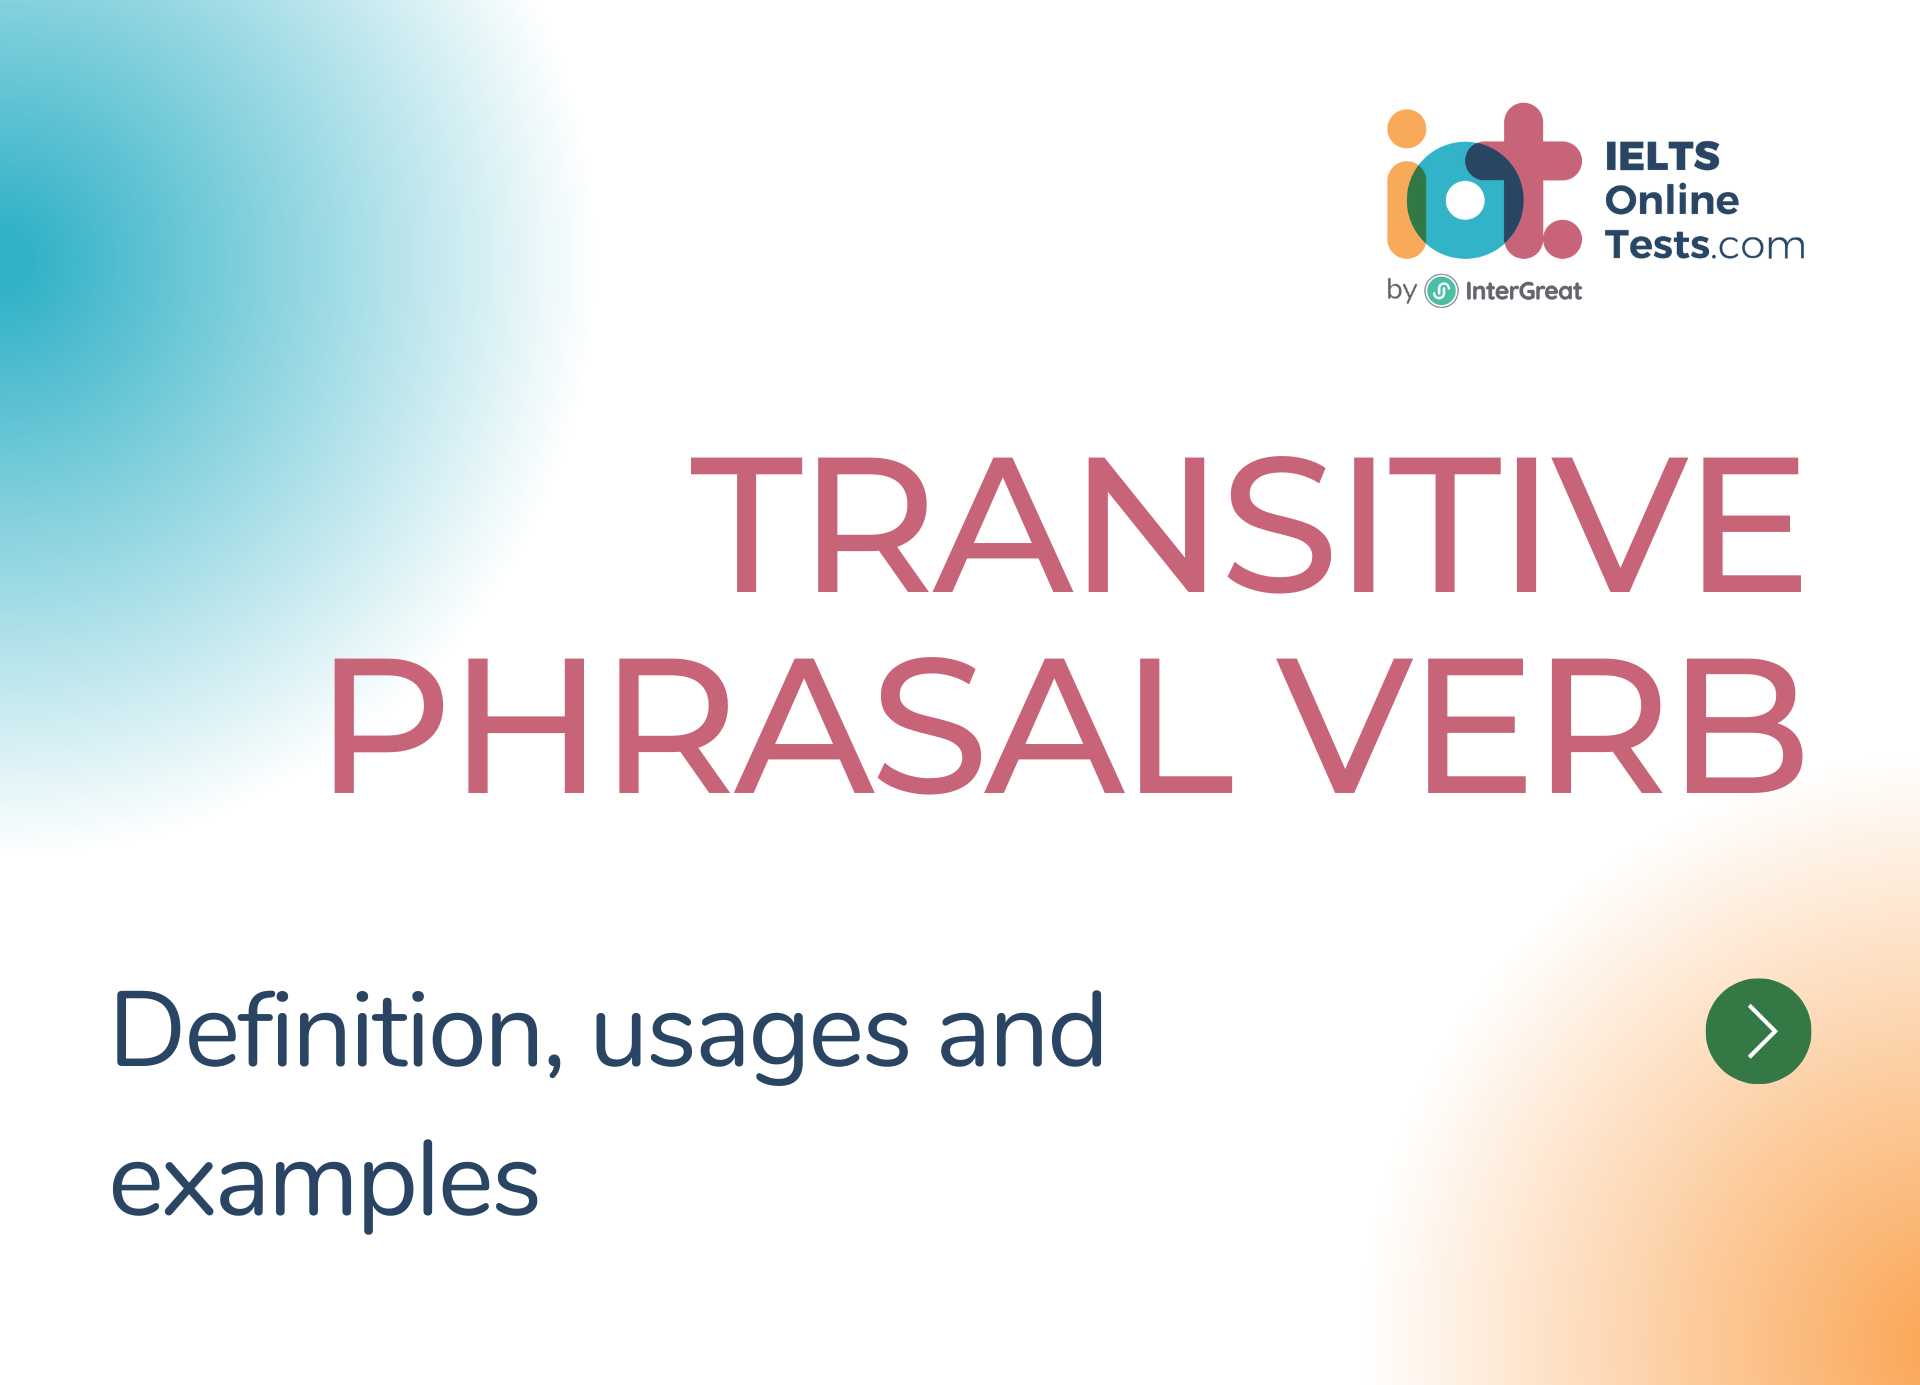 Transitive Phrasal Verb definition, usages and examples